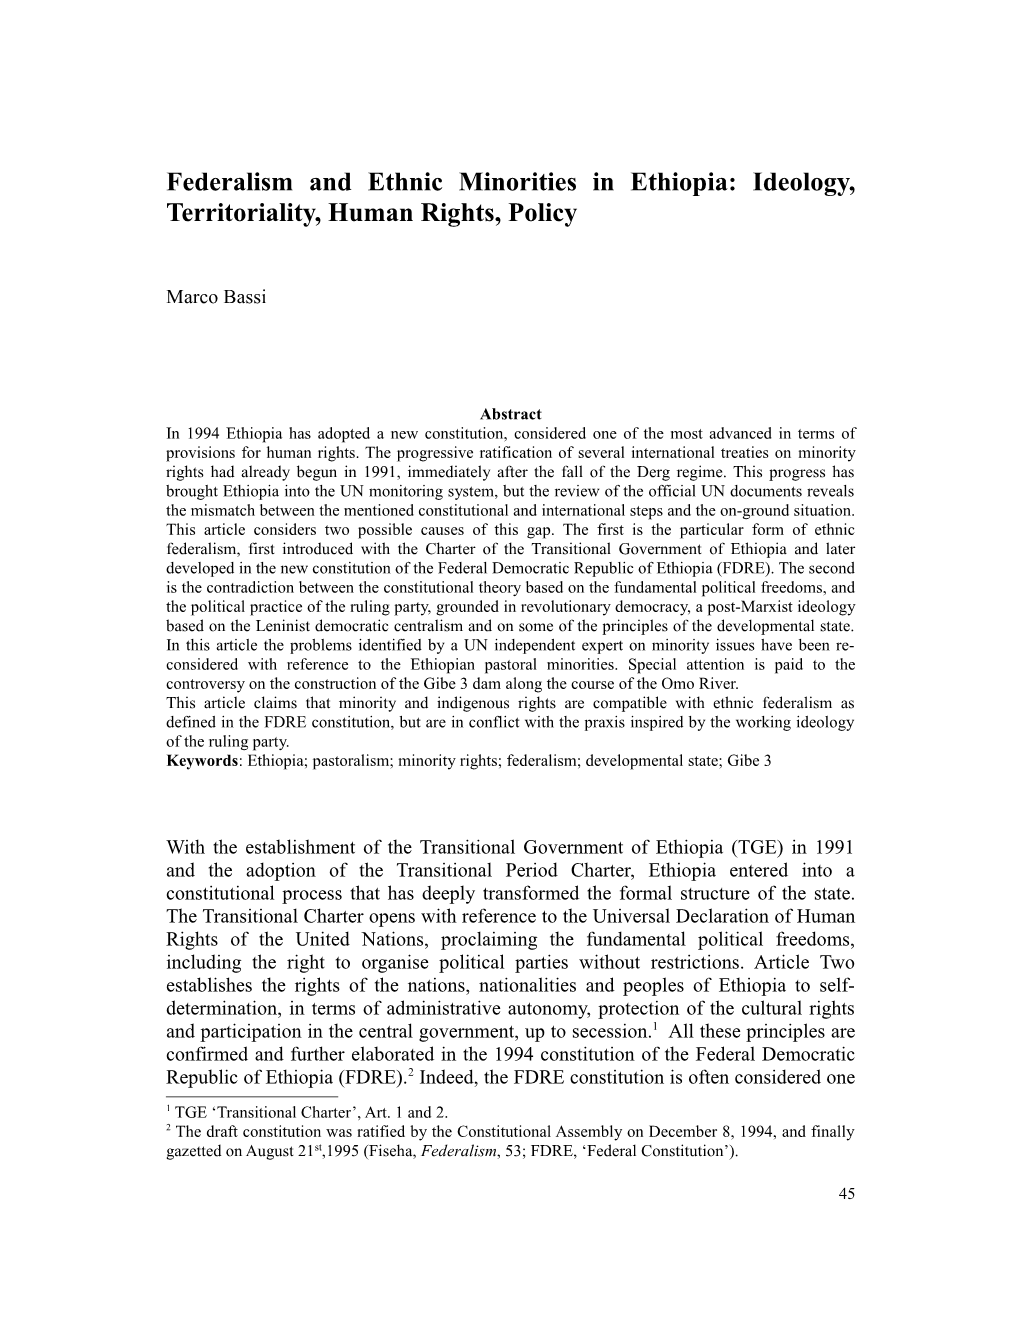 Federalism and Ethnic Minorities in Ethiopia: Ideology, Territoriality, Human Rights, Policy